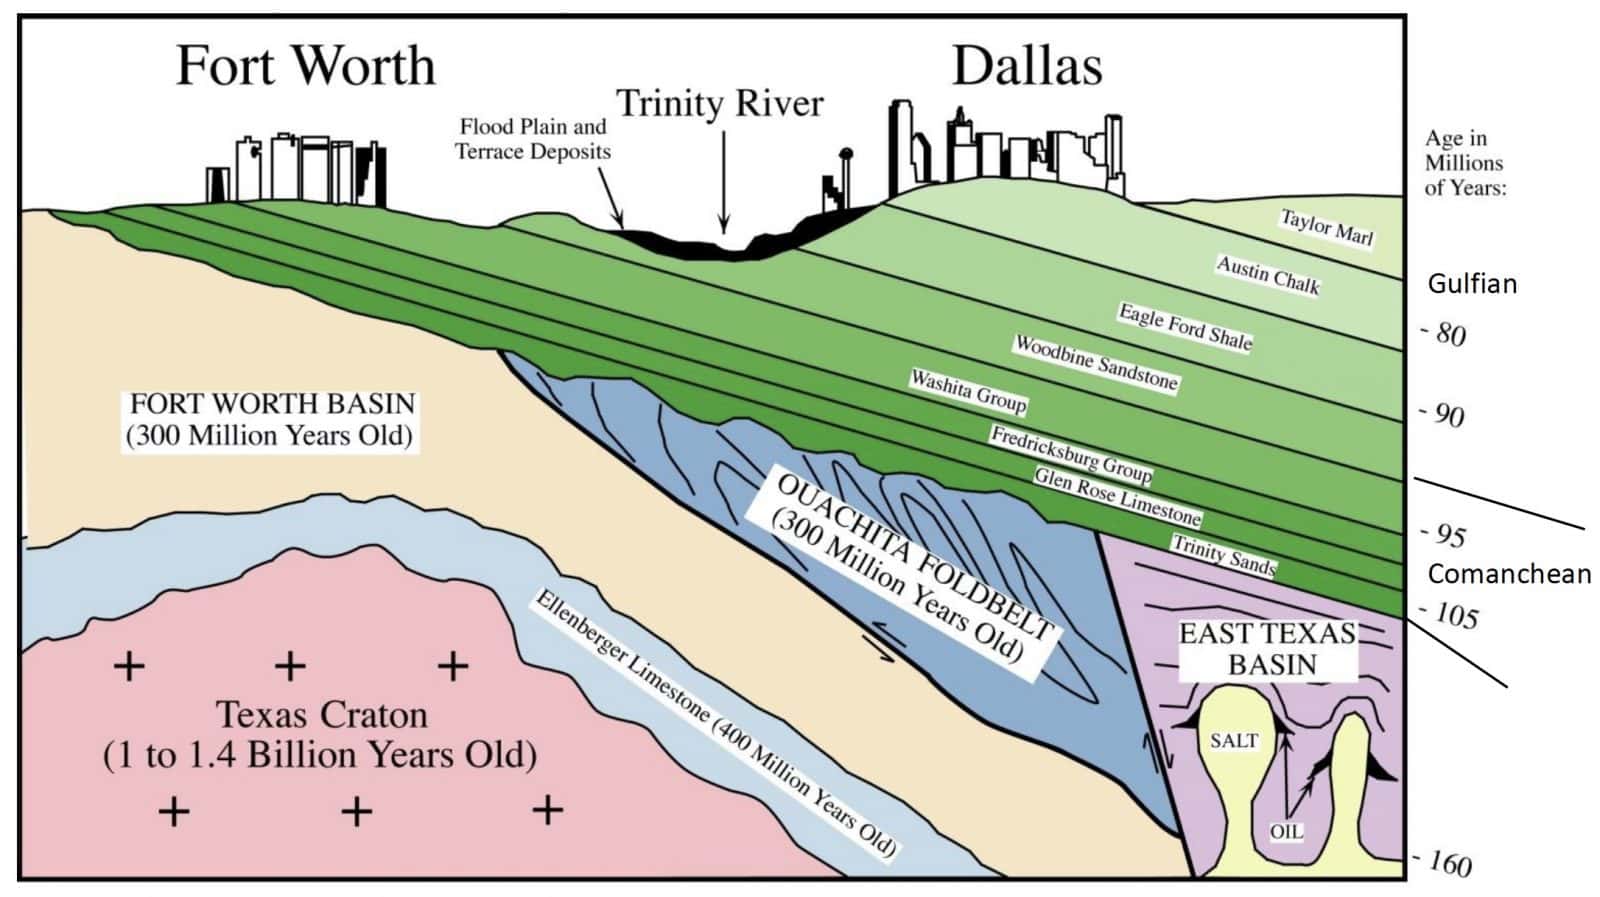 Geological Layers of Dallas Fort Worth